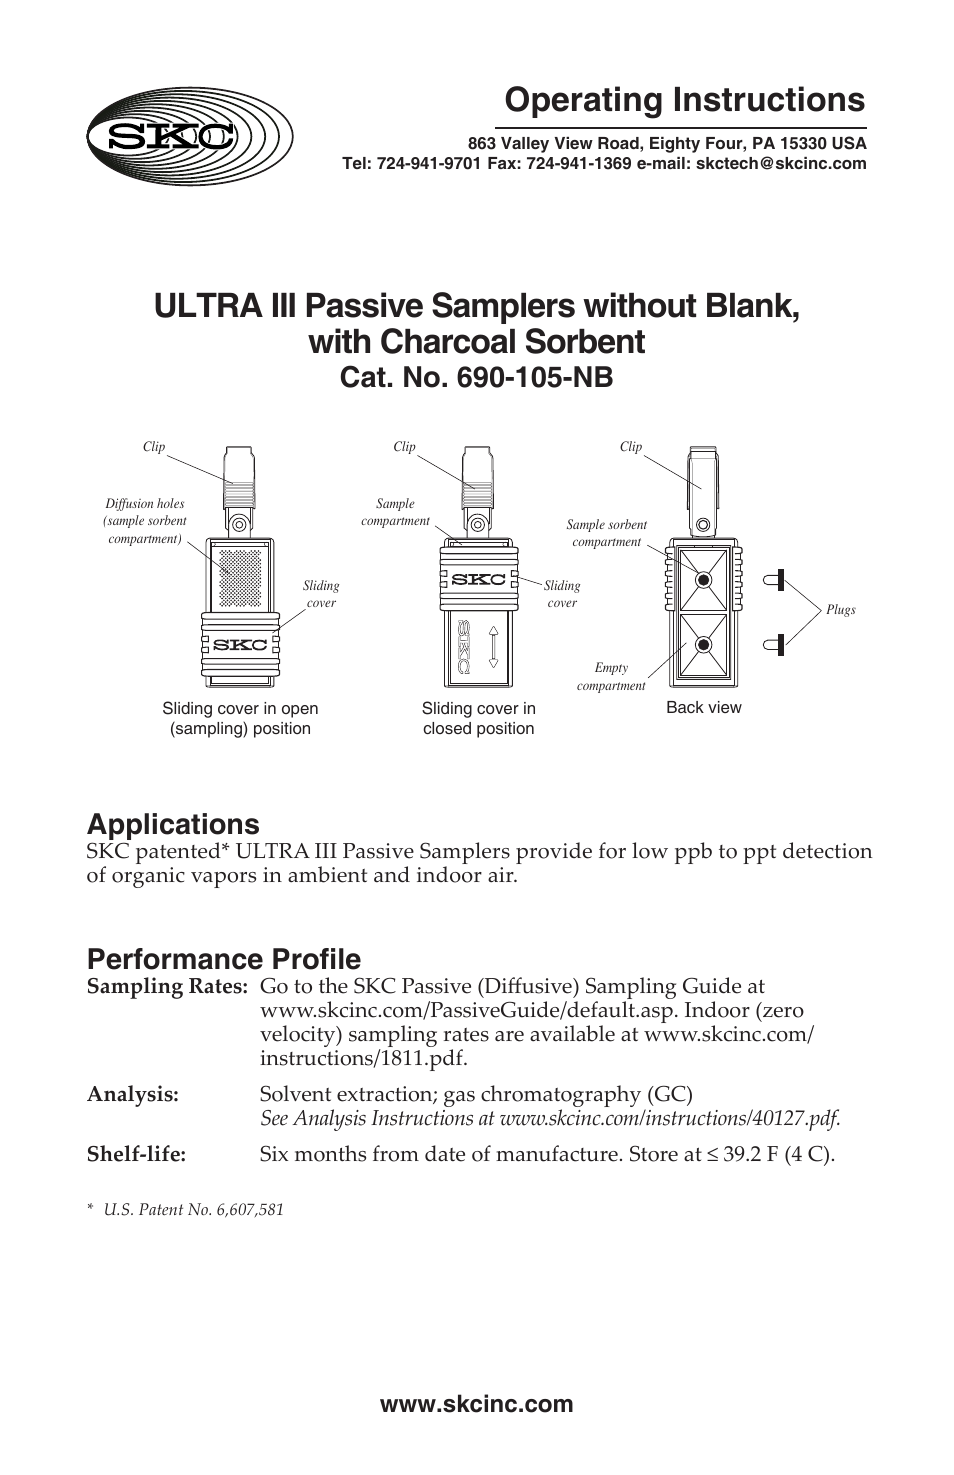 690-105-NB ULTRA III Passive Samplers without Blank, with Charcoal Sorbent